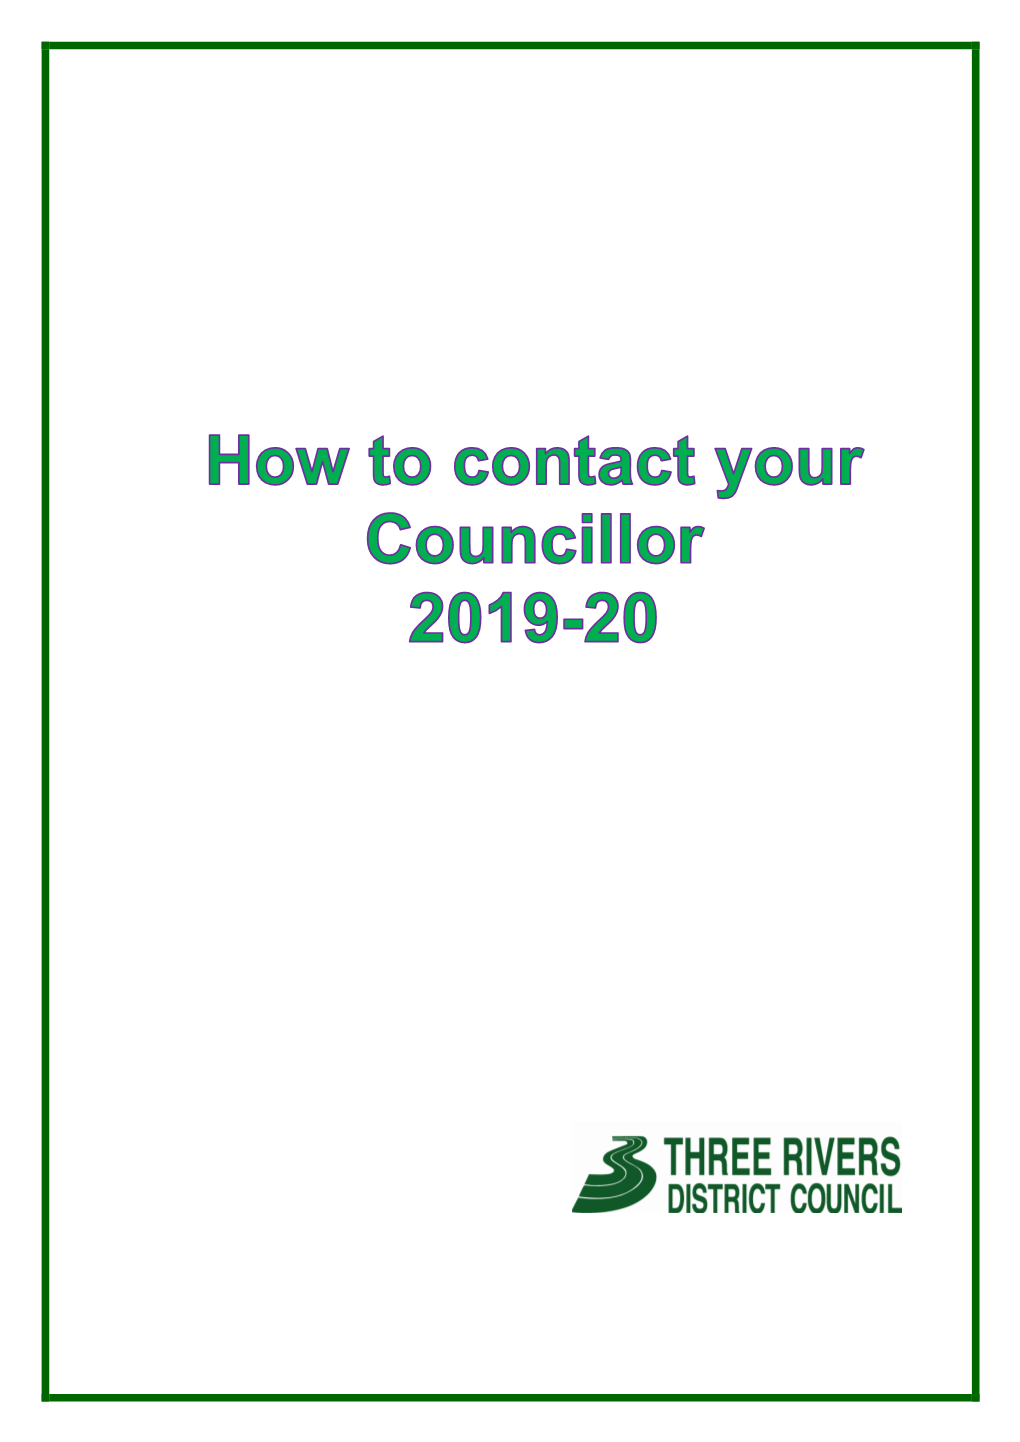 How to Contact Your Councillors